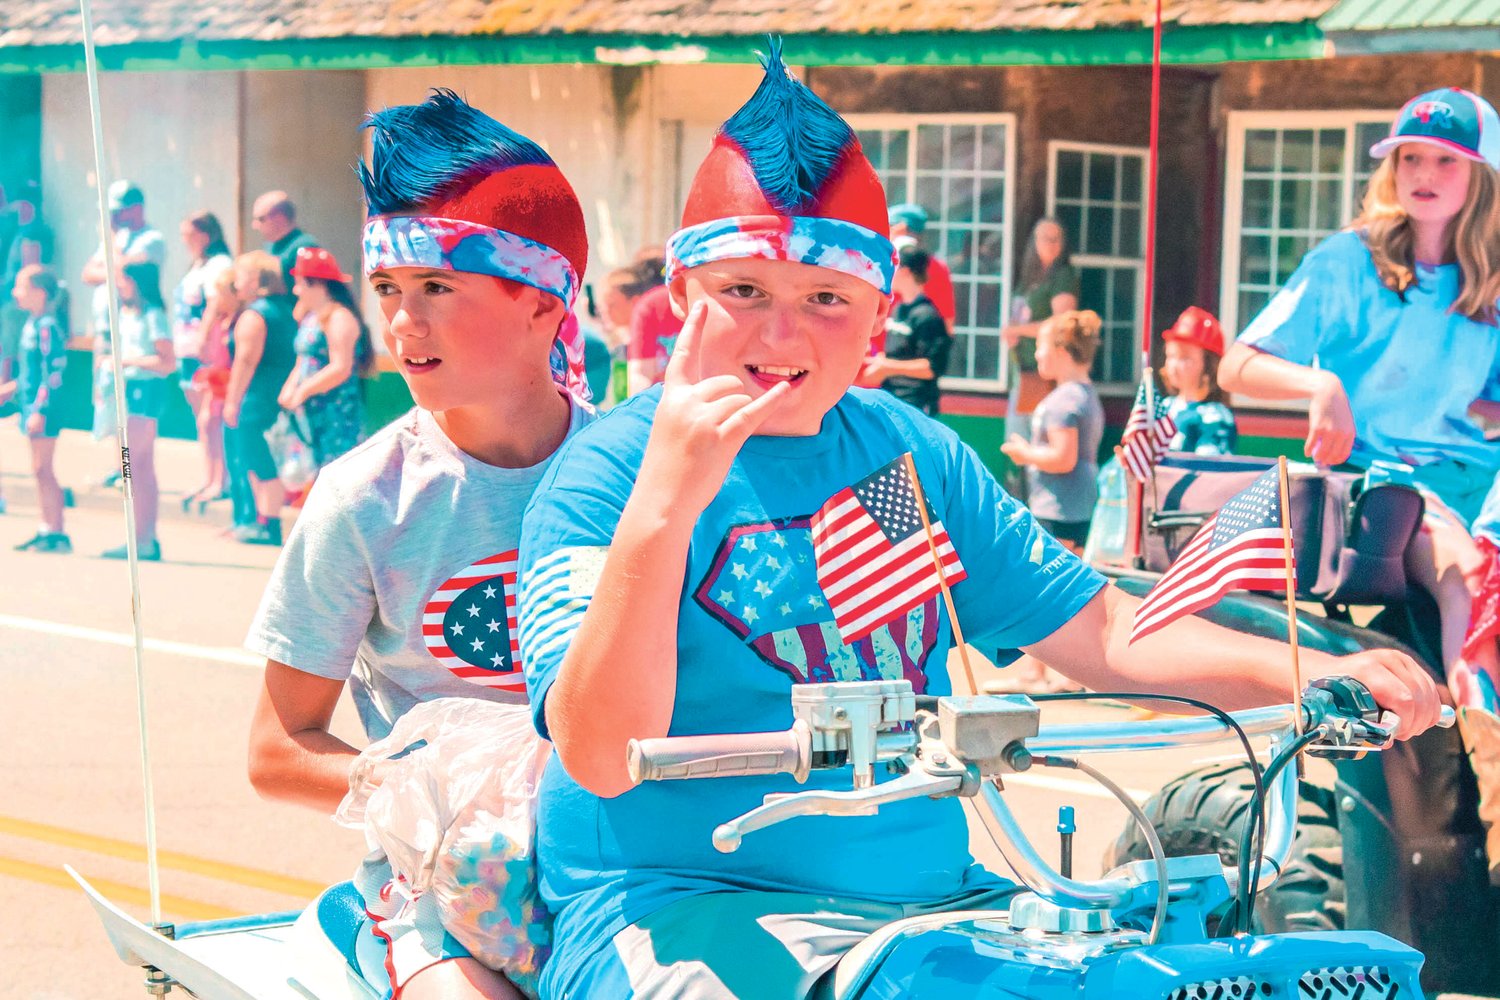 Riders decked out in red, white, and blue attire throw candy from atop a quad during the Pe Ell Fourth of July parade Sunday afternoon.